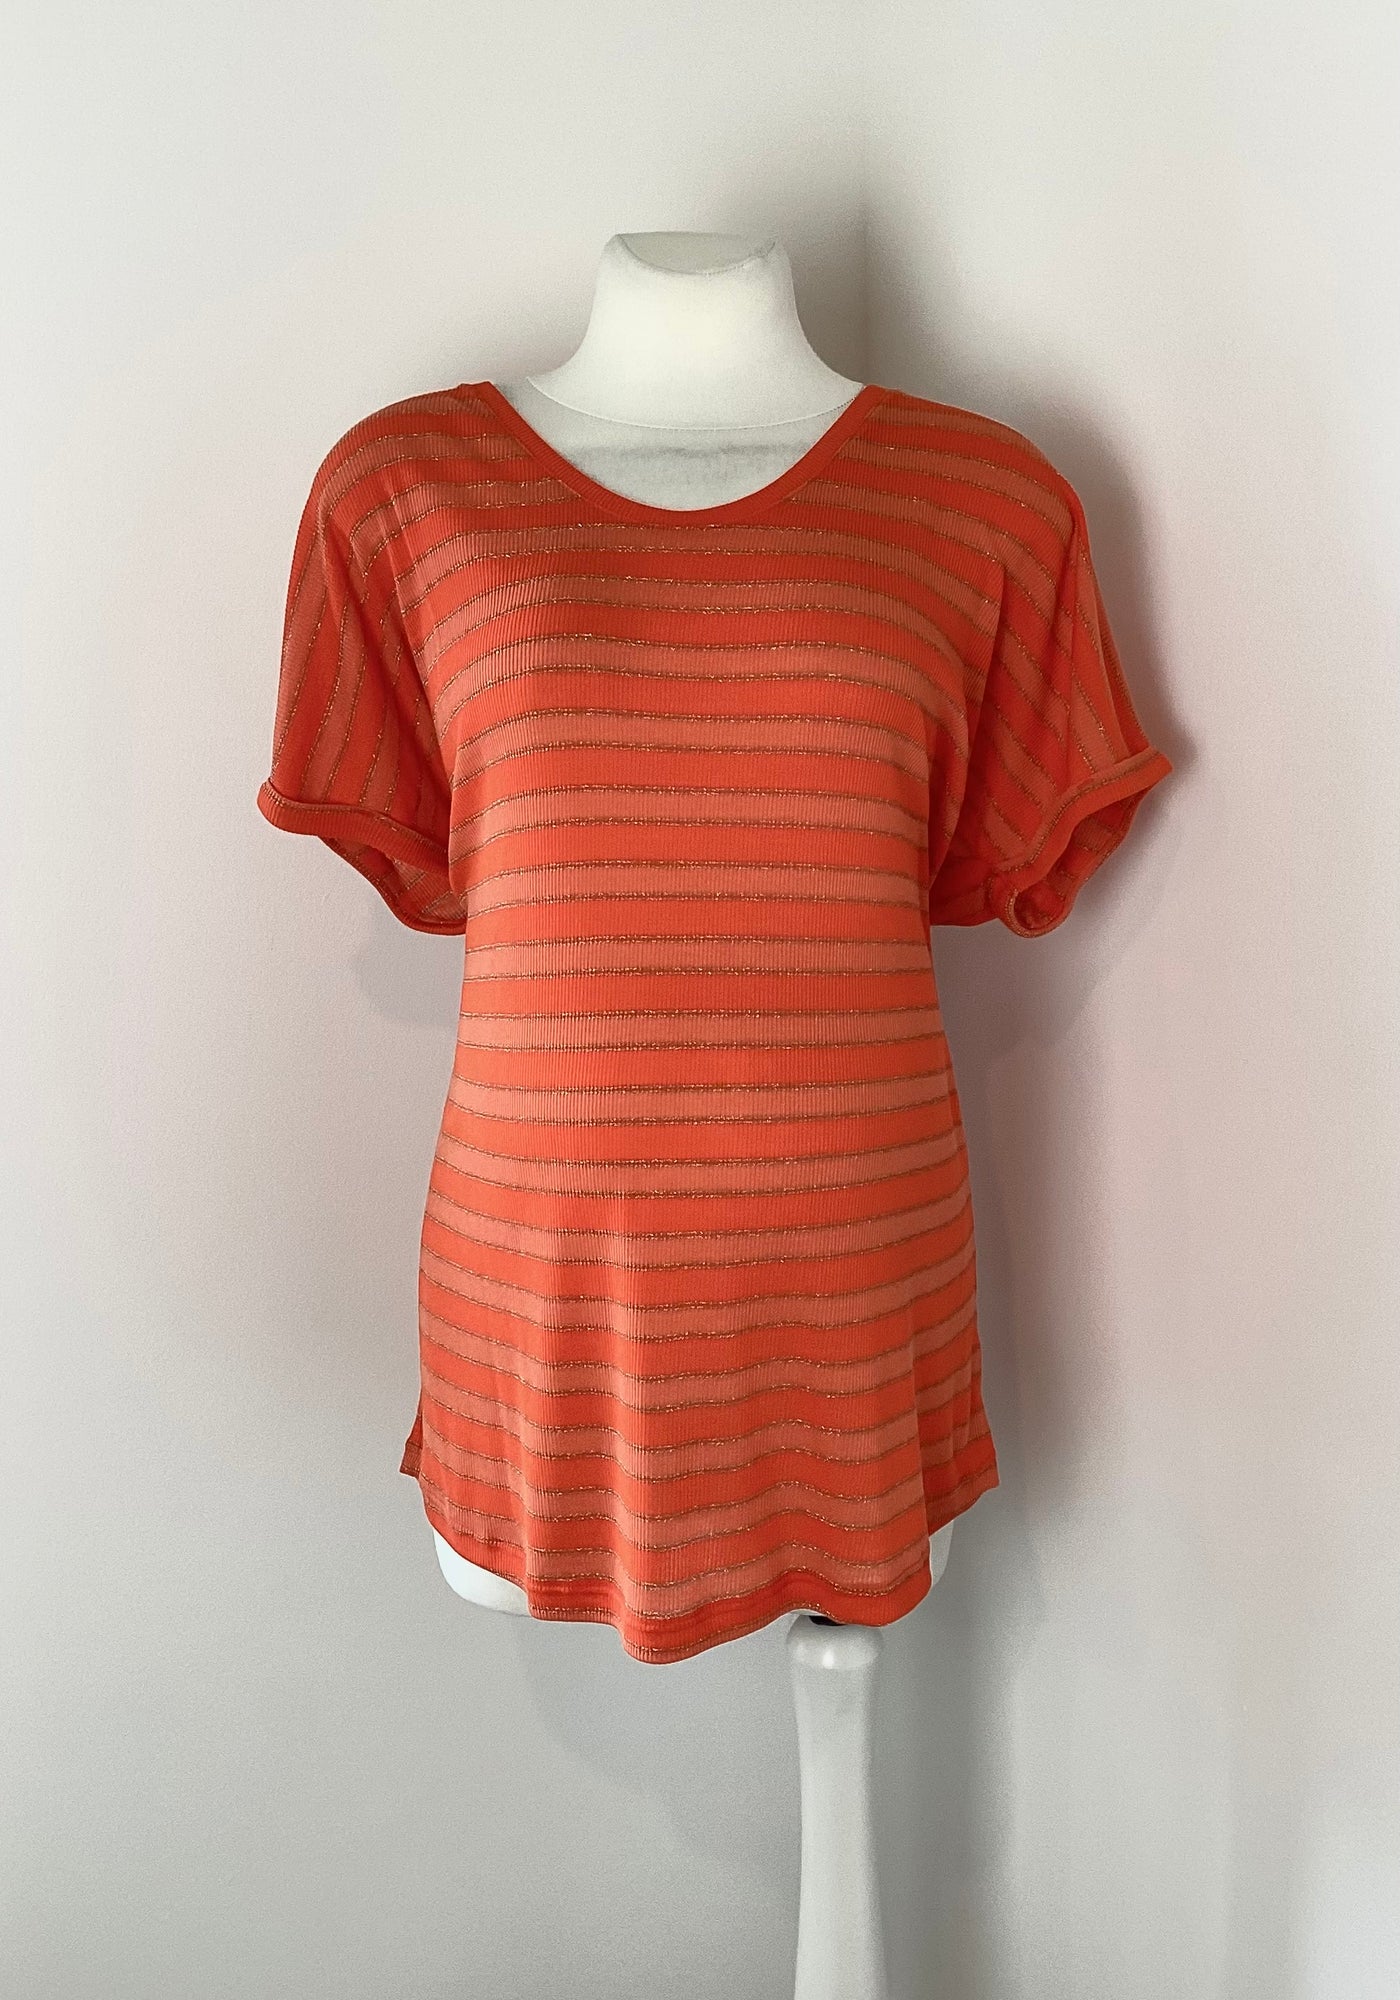 Next Maternity orange, coral & gold striped t-shirt top (BNWT) - Size 16